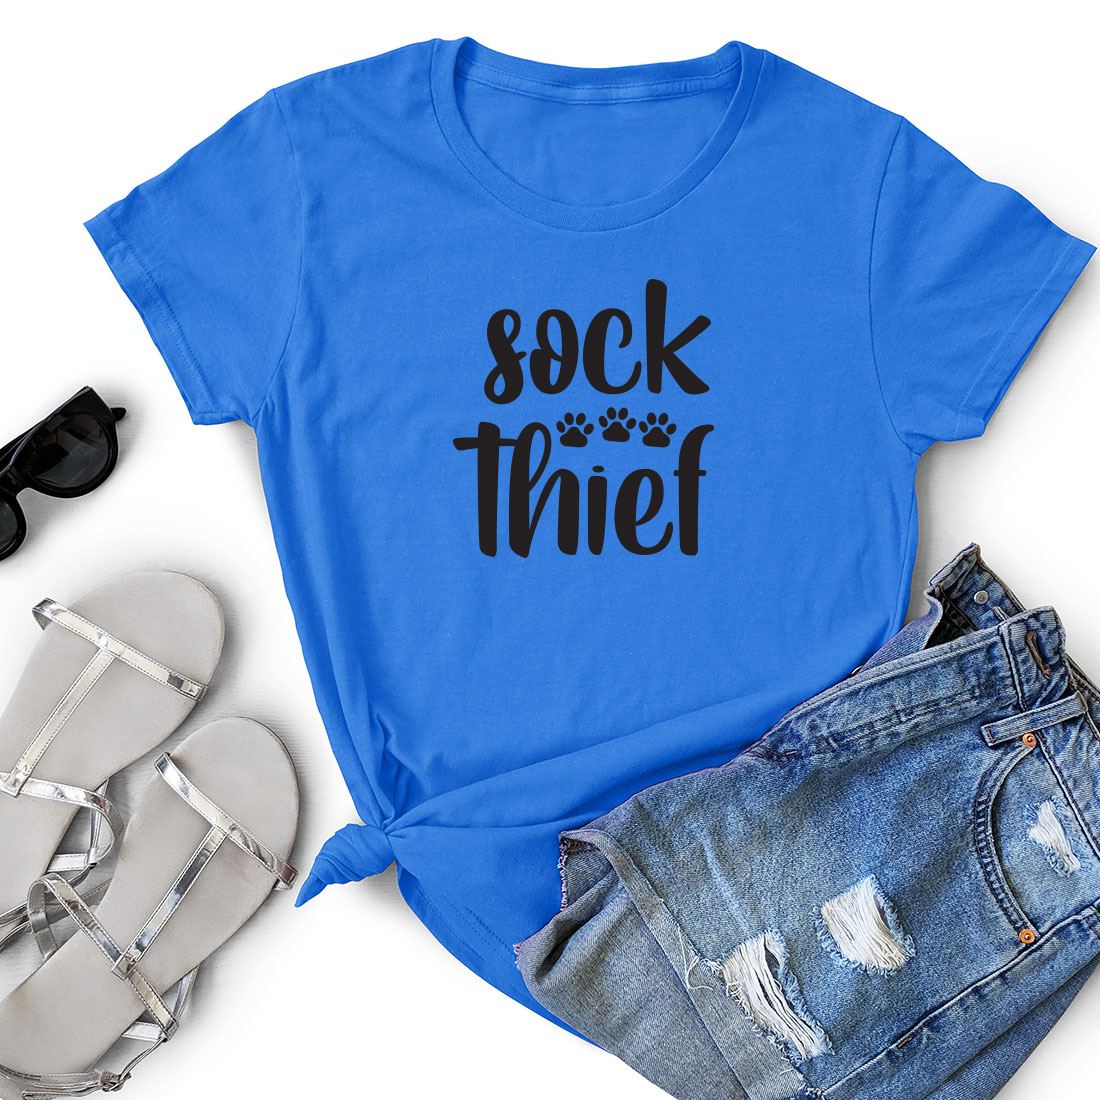 T - shirt that says sock thief next to a pair of shorts.